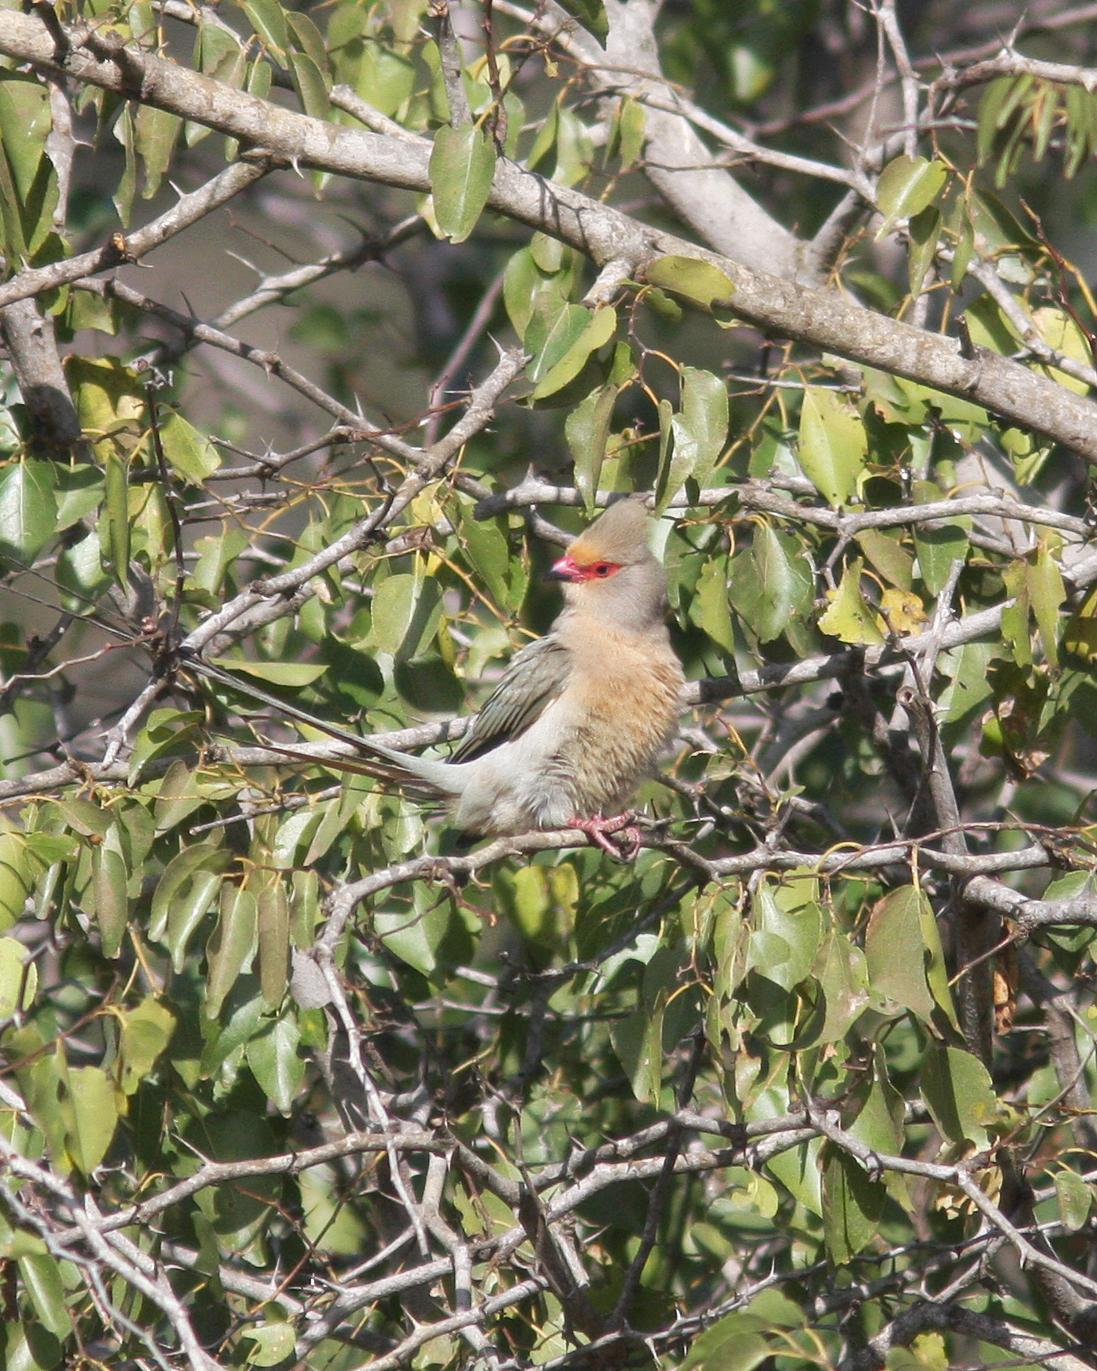 Red-faced Mousebird Photo by Henk Baptist